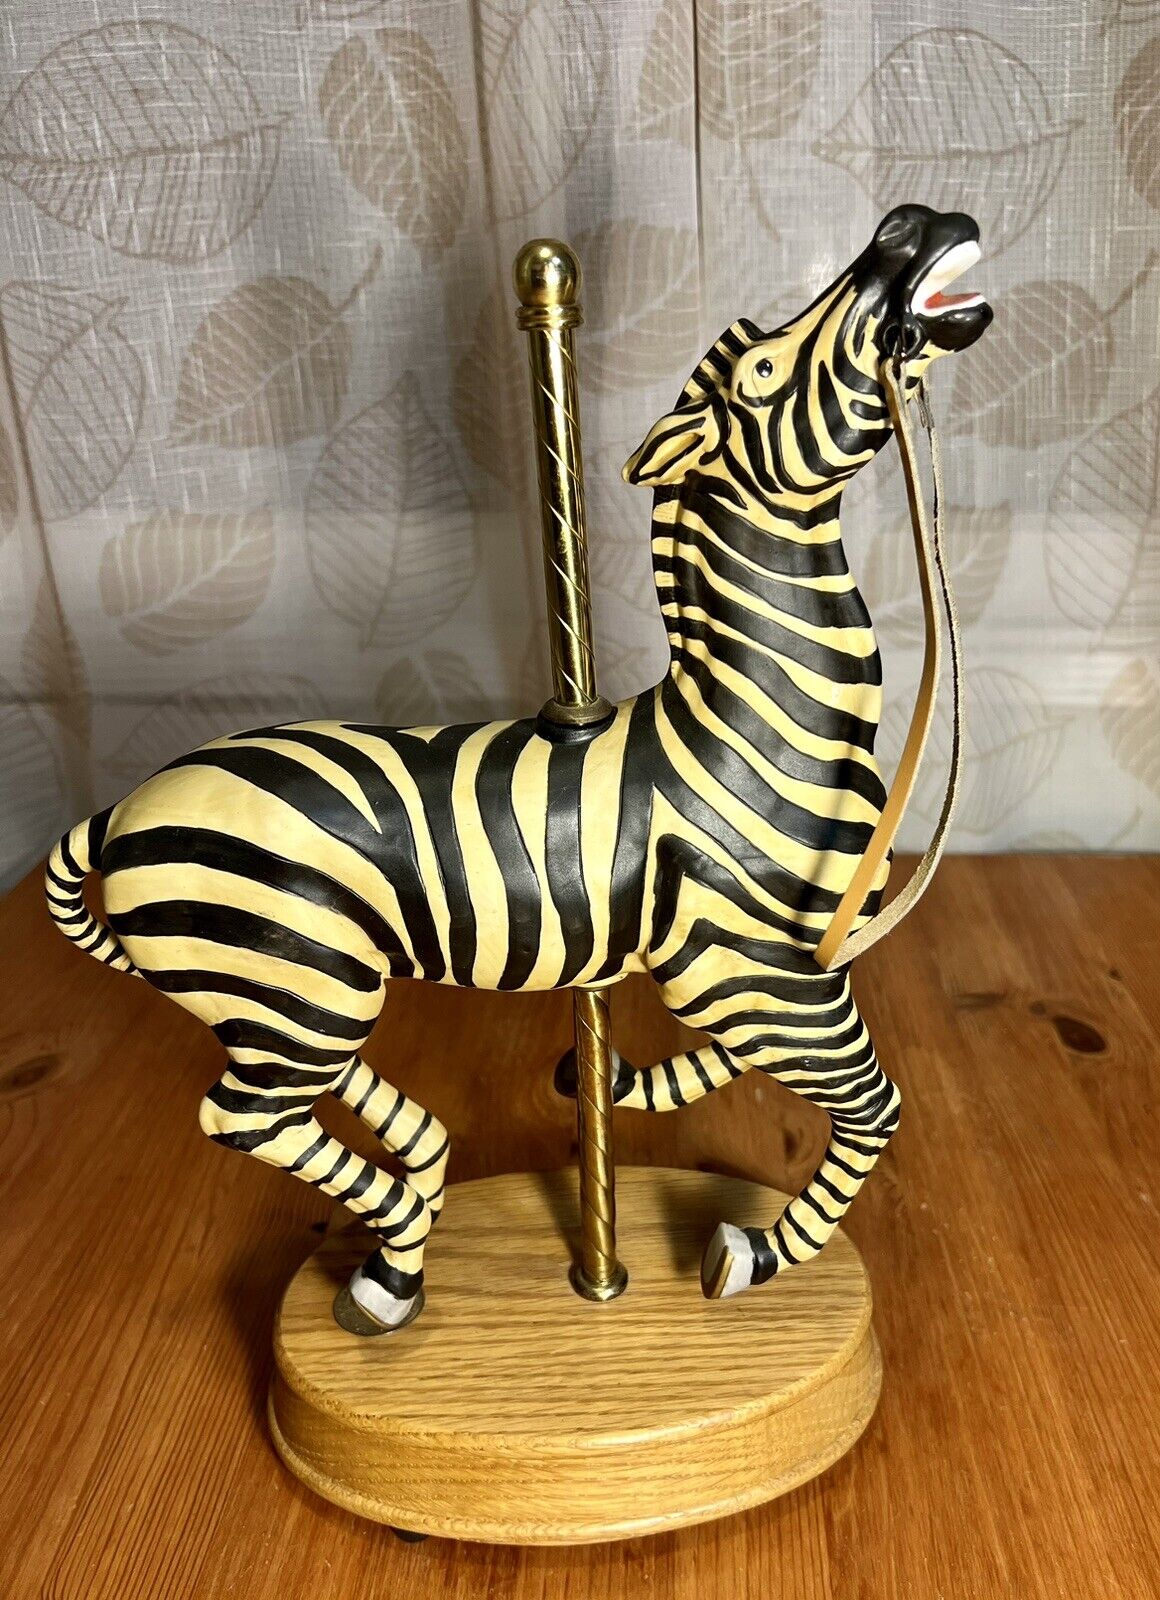 Vintage 80s Willitts Tobin Fraley Signed Limited Edition American Carousel Zebra